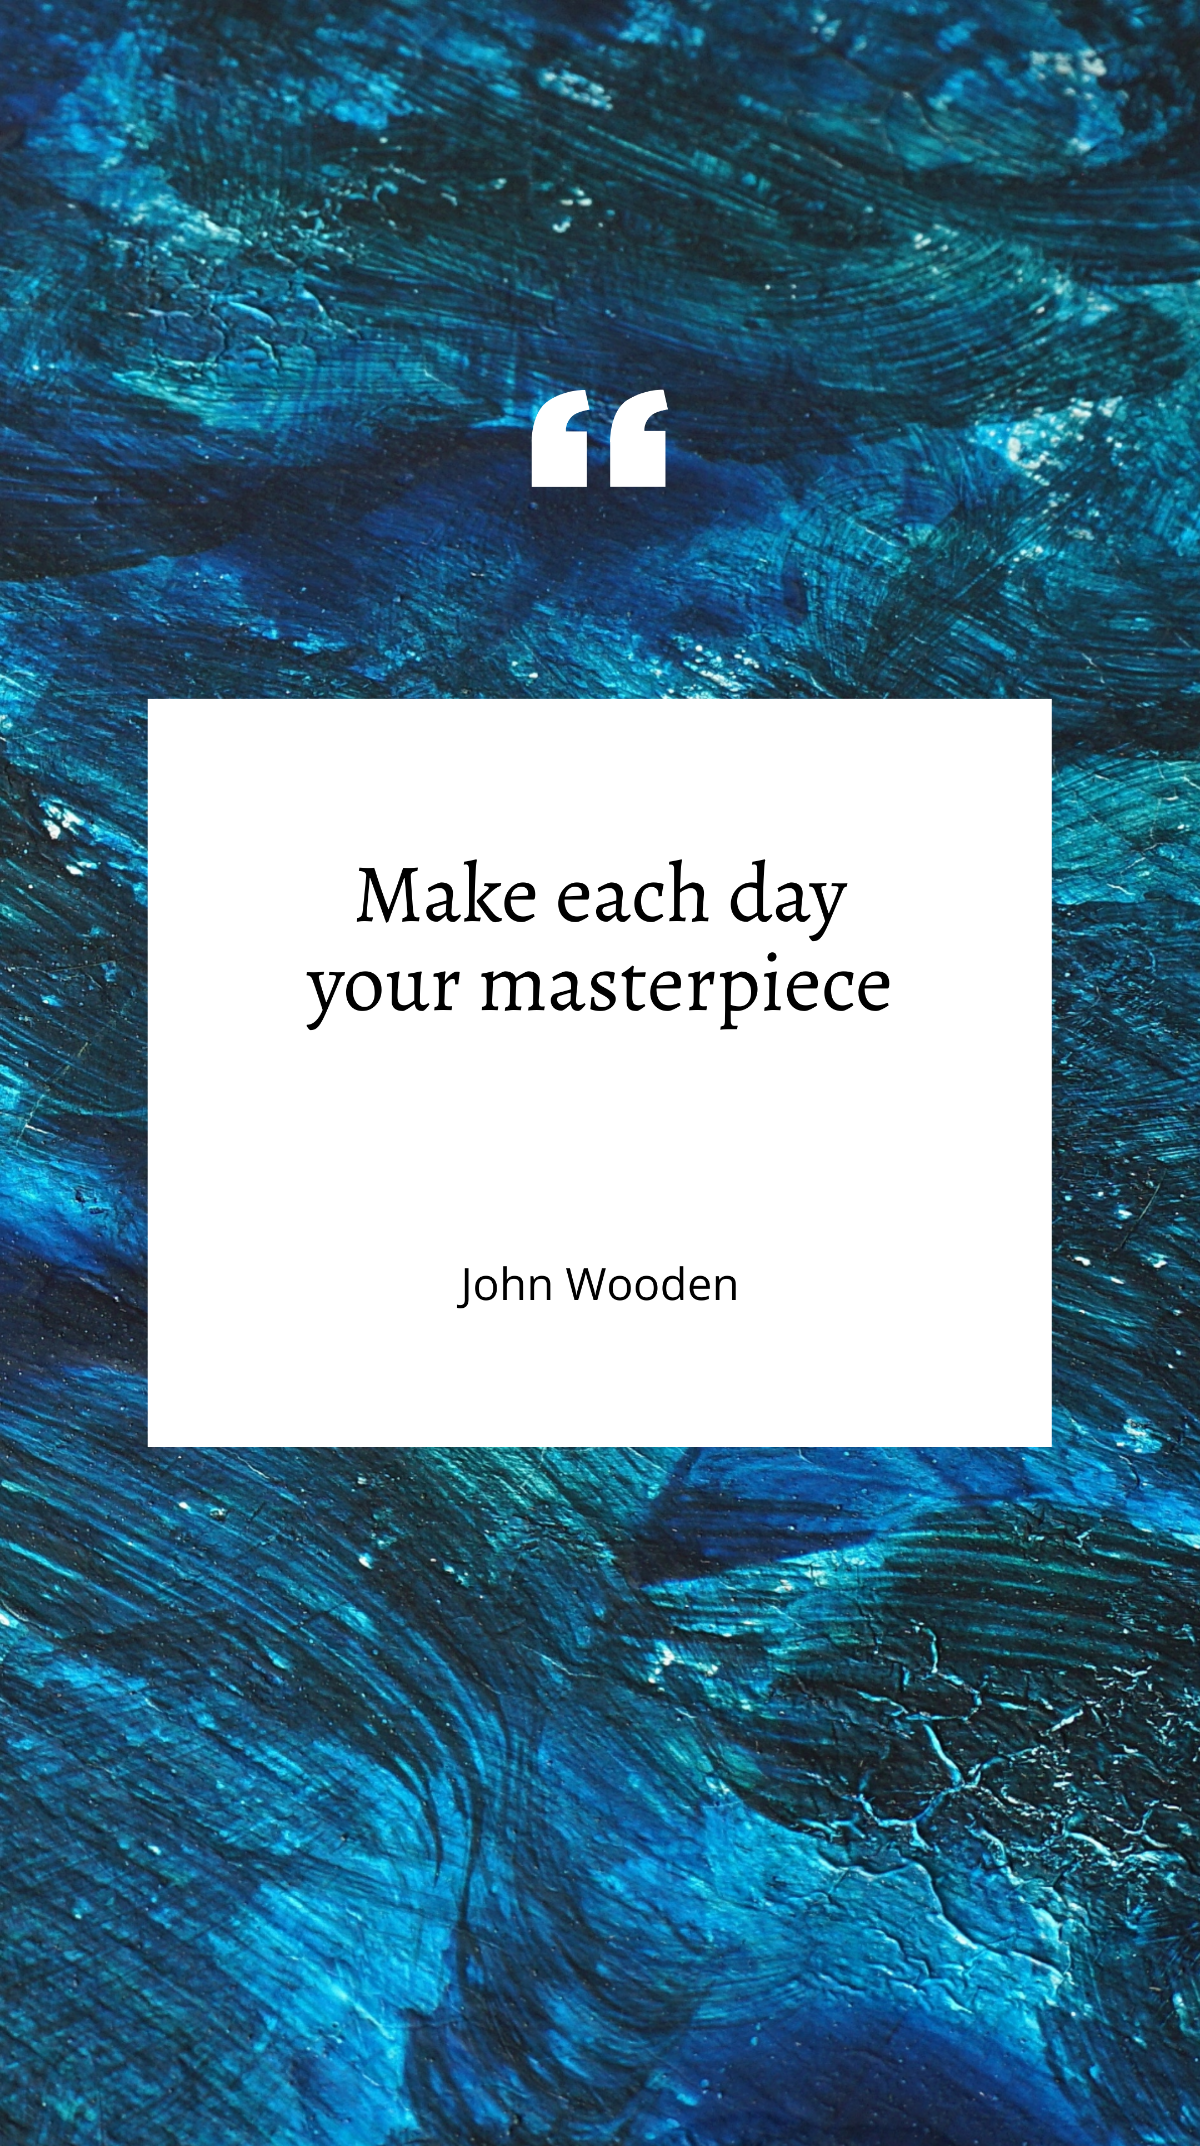 John Wooden - Make each day your masterpiece